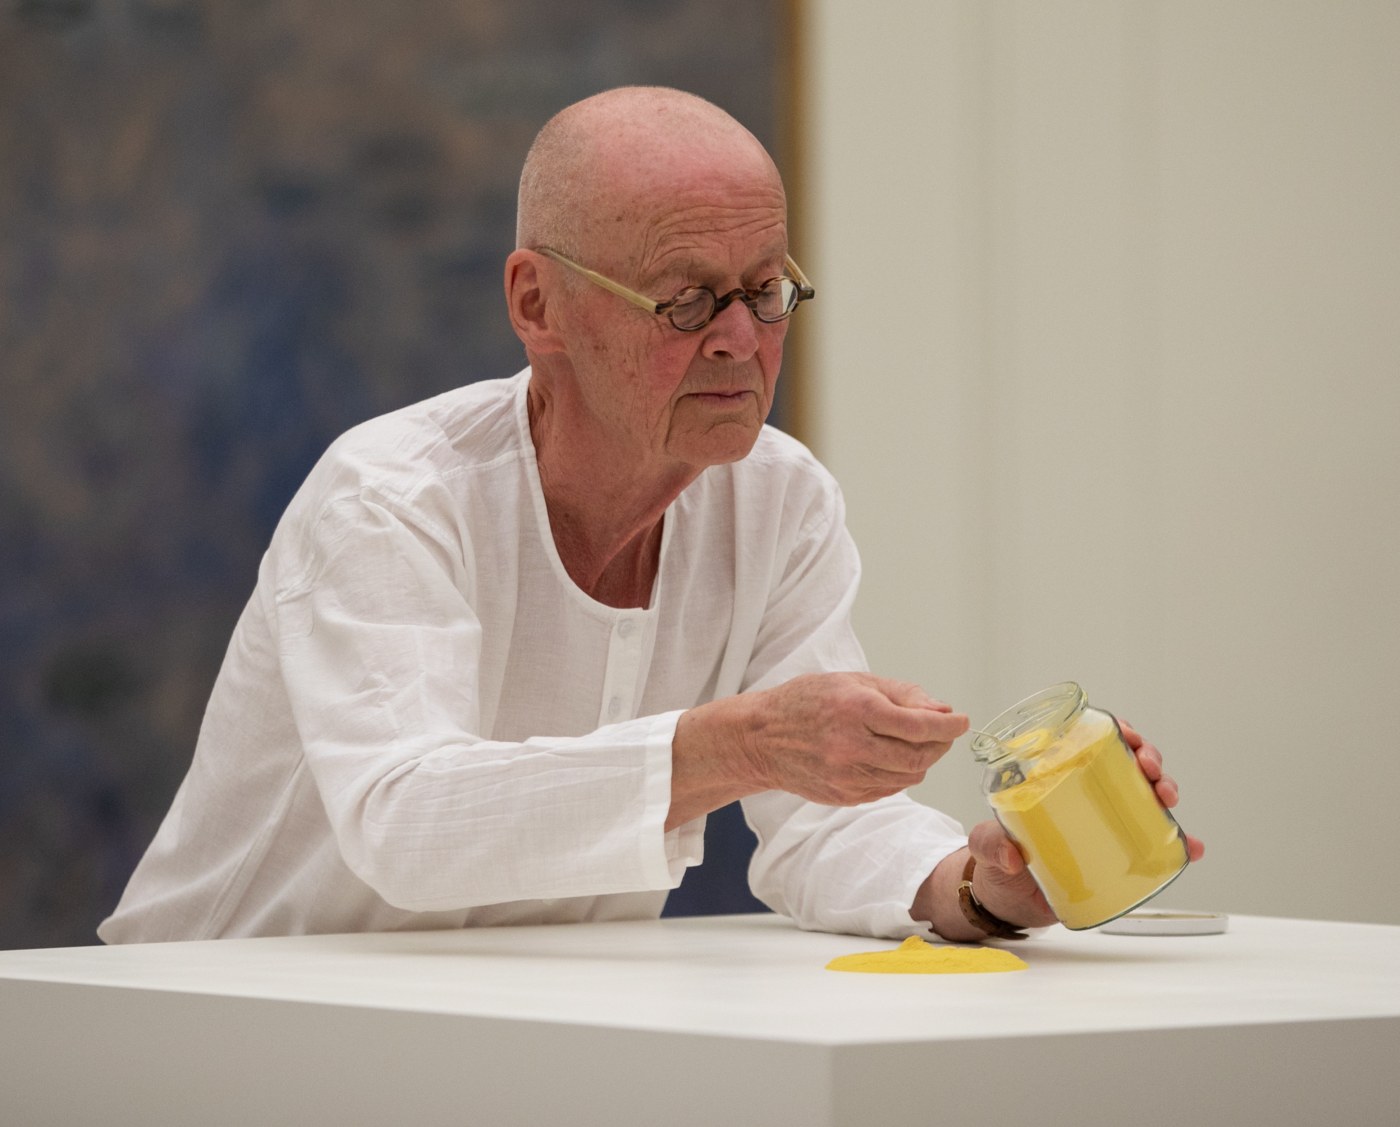 The artist, Wolfgang Laib, spoons yellow pollen from a jar onto a white pedestal, creating a mound of pollen.